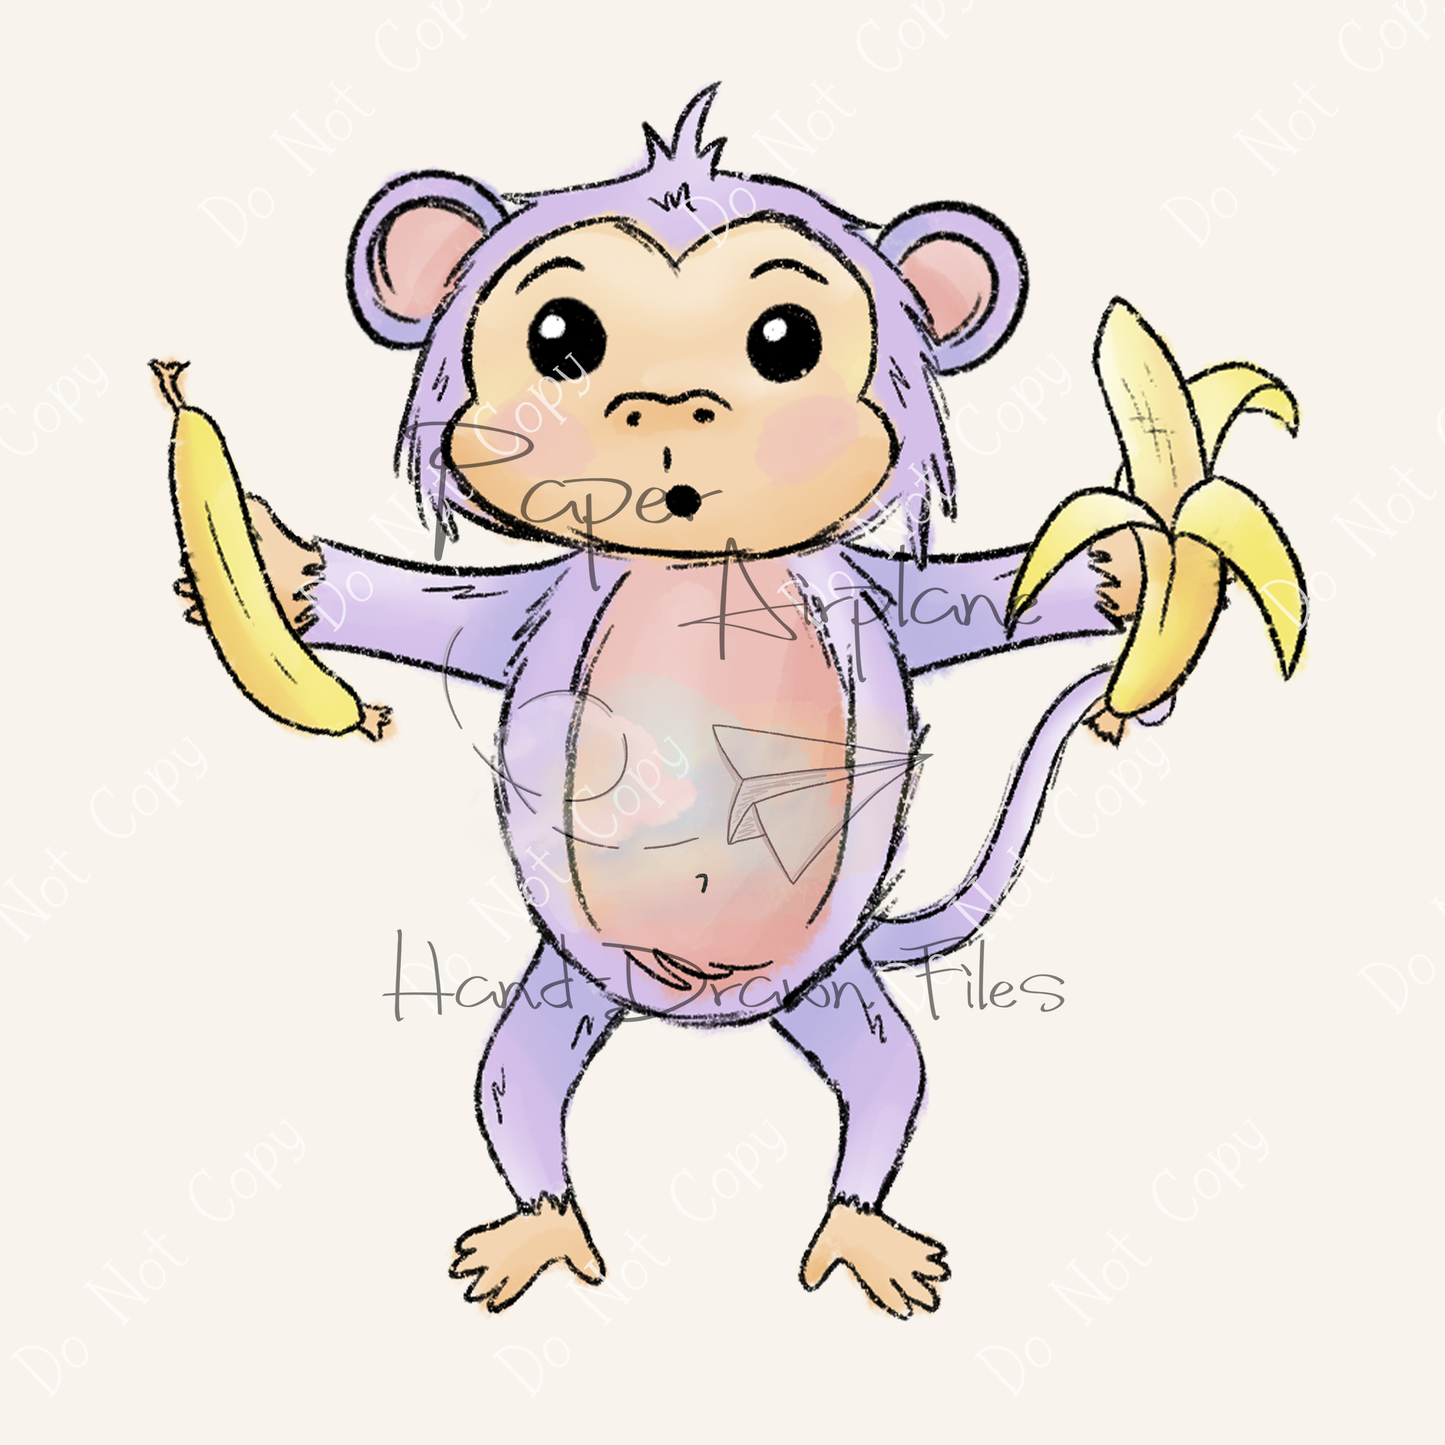 Monkeys and Bananas (Cotton Candy)